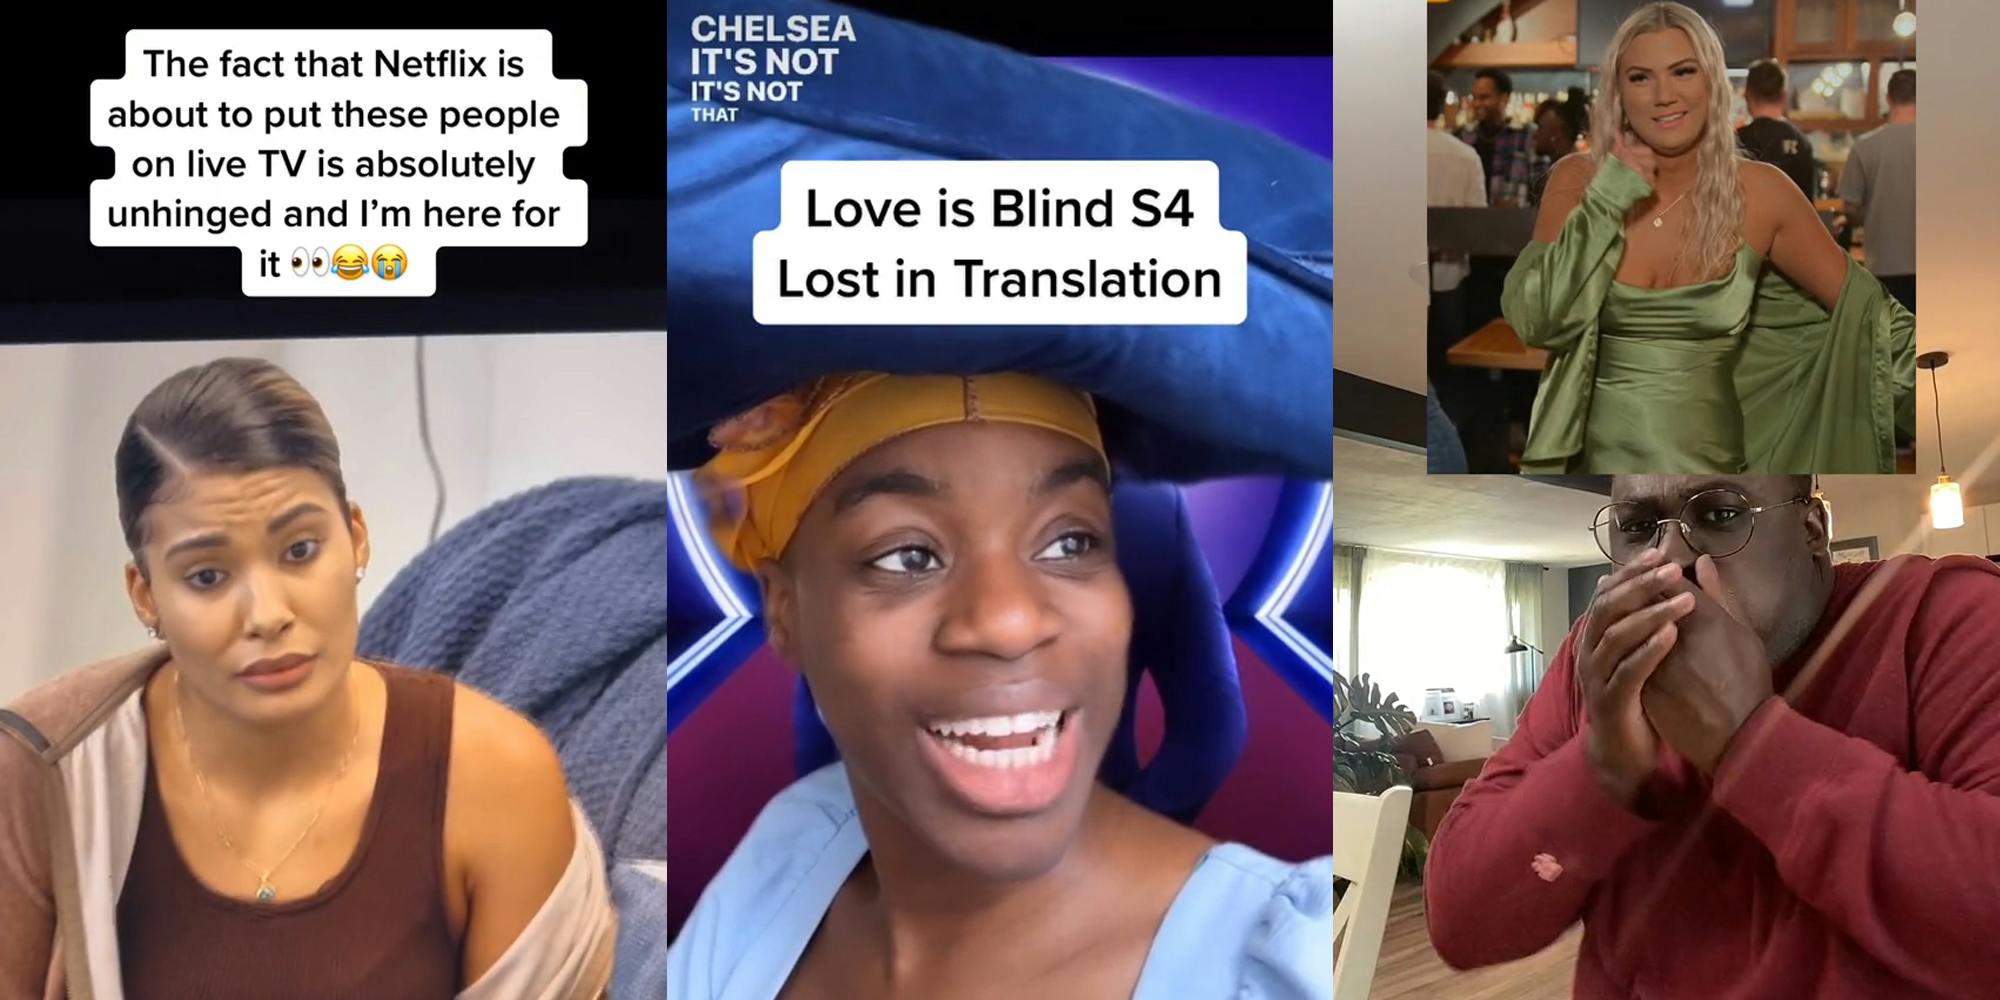 Love is Blind on screen with caption "The fact that Netflix is about to put these people on live TV is absolutely unhinged and I'm here for it" (l) person wearing hat with caption "Love is Blind S4 Lost in Translation" (c) person reacting to image of blond woman (r)